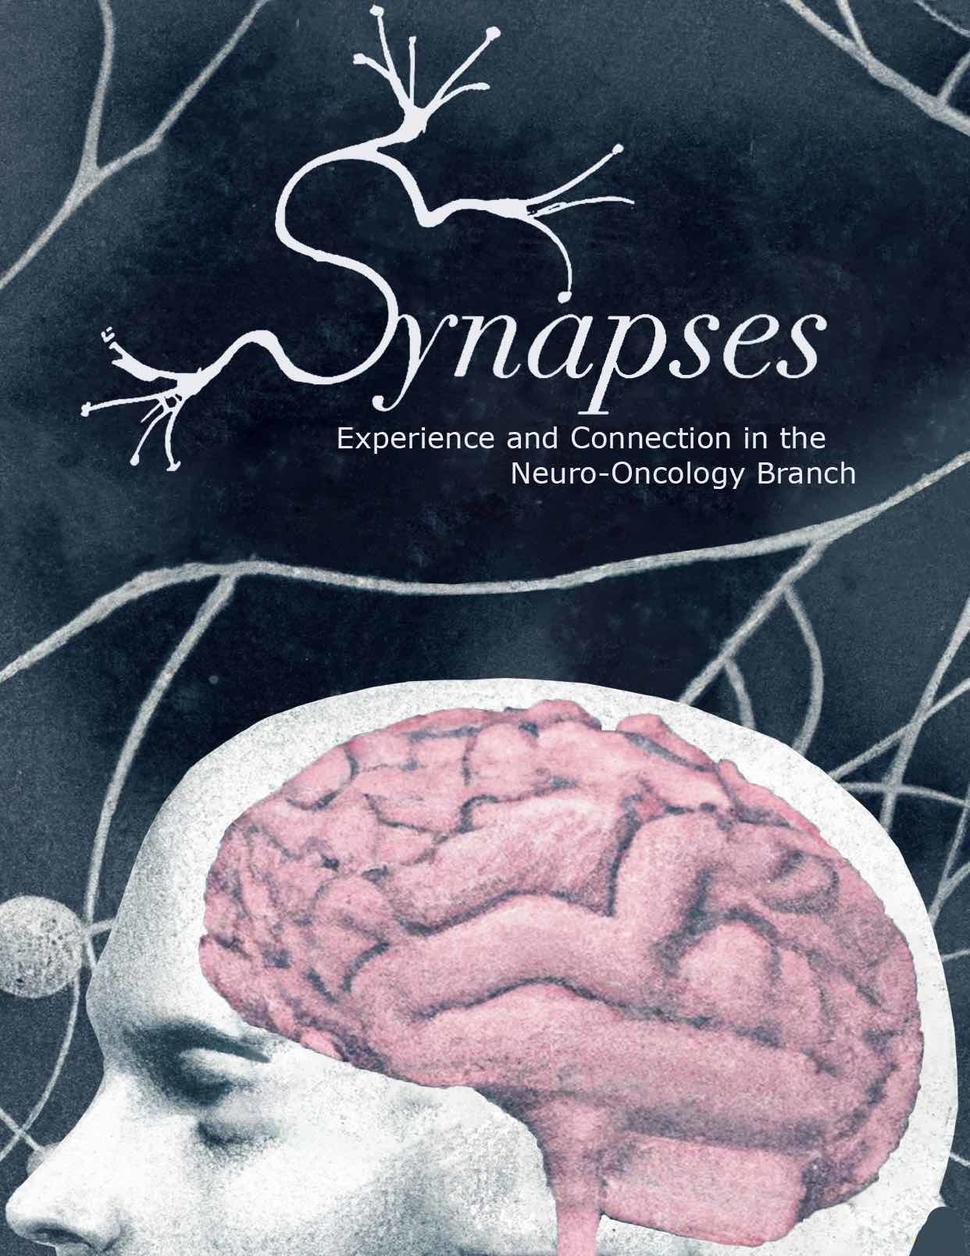 An illustration of a brain and head with the words: Synapses — experience and connection in the Neuro-Oncology Branch